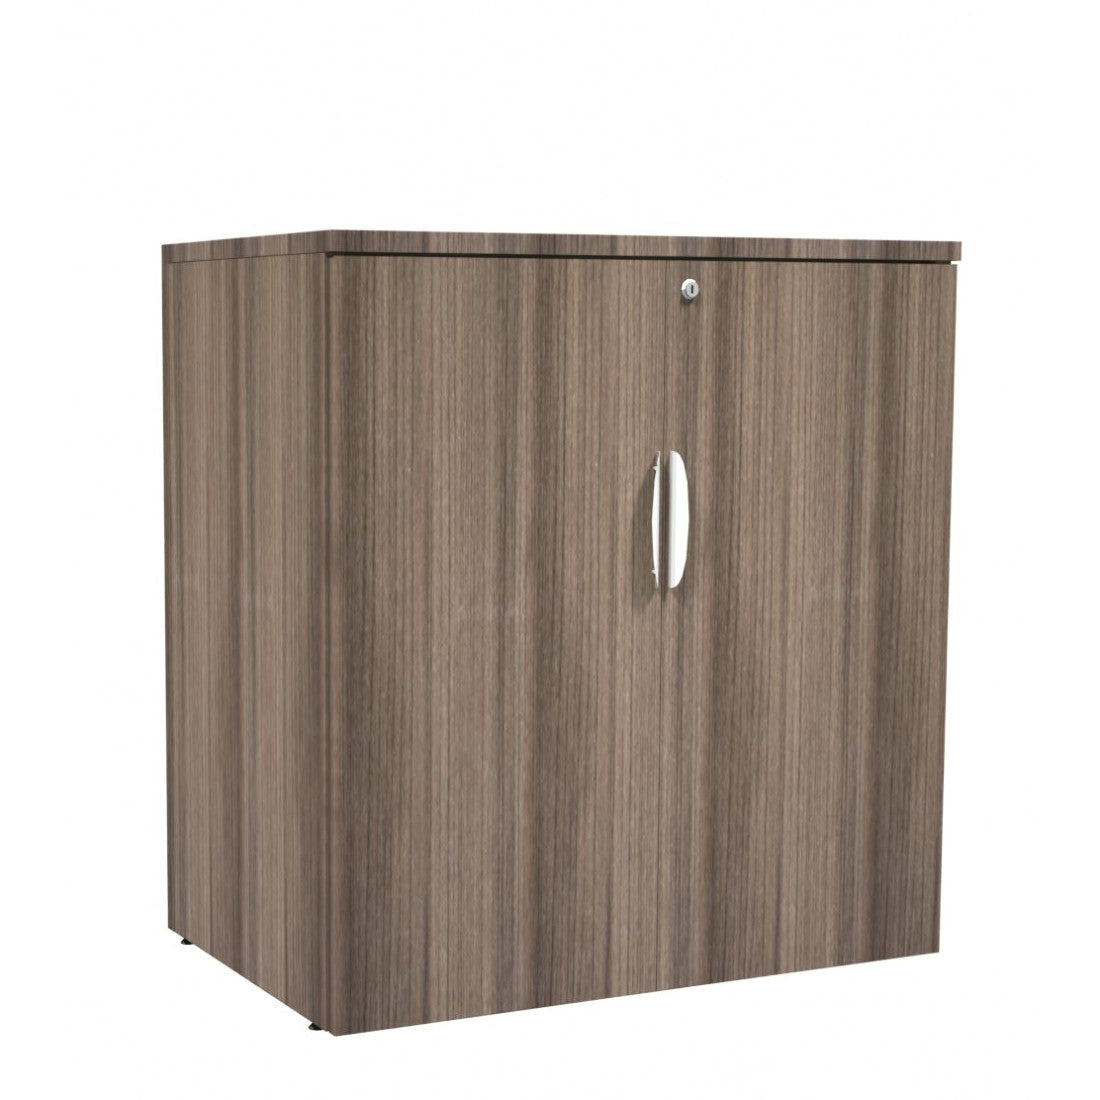 Performance - Two Door Laminate Storage Cabinet 36" Height - Duckys Office Furniture